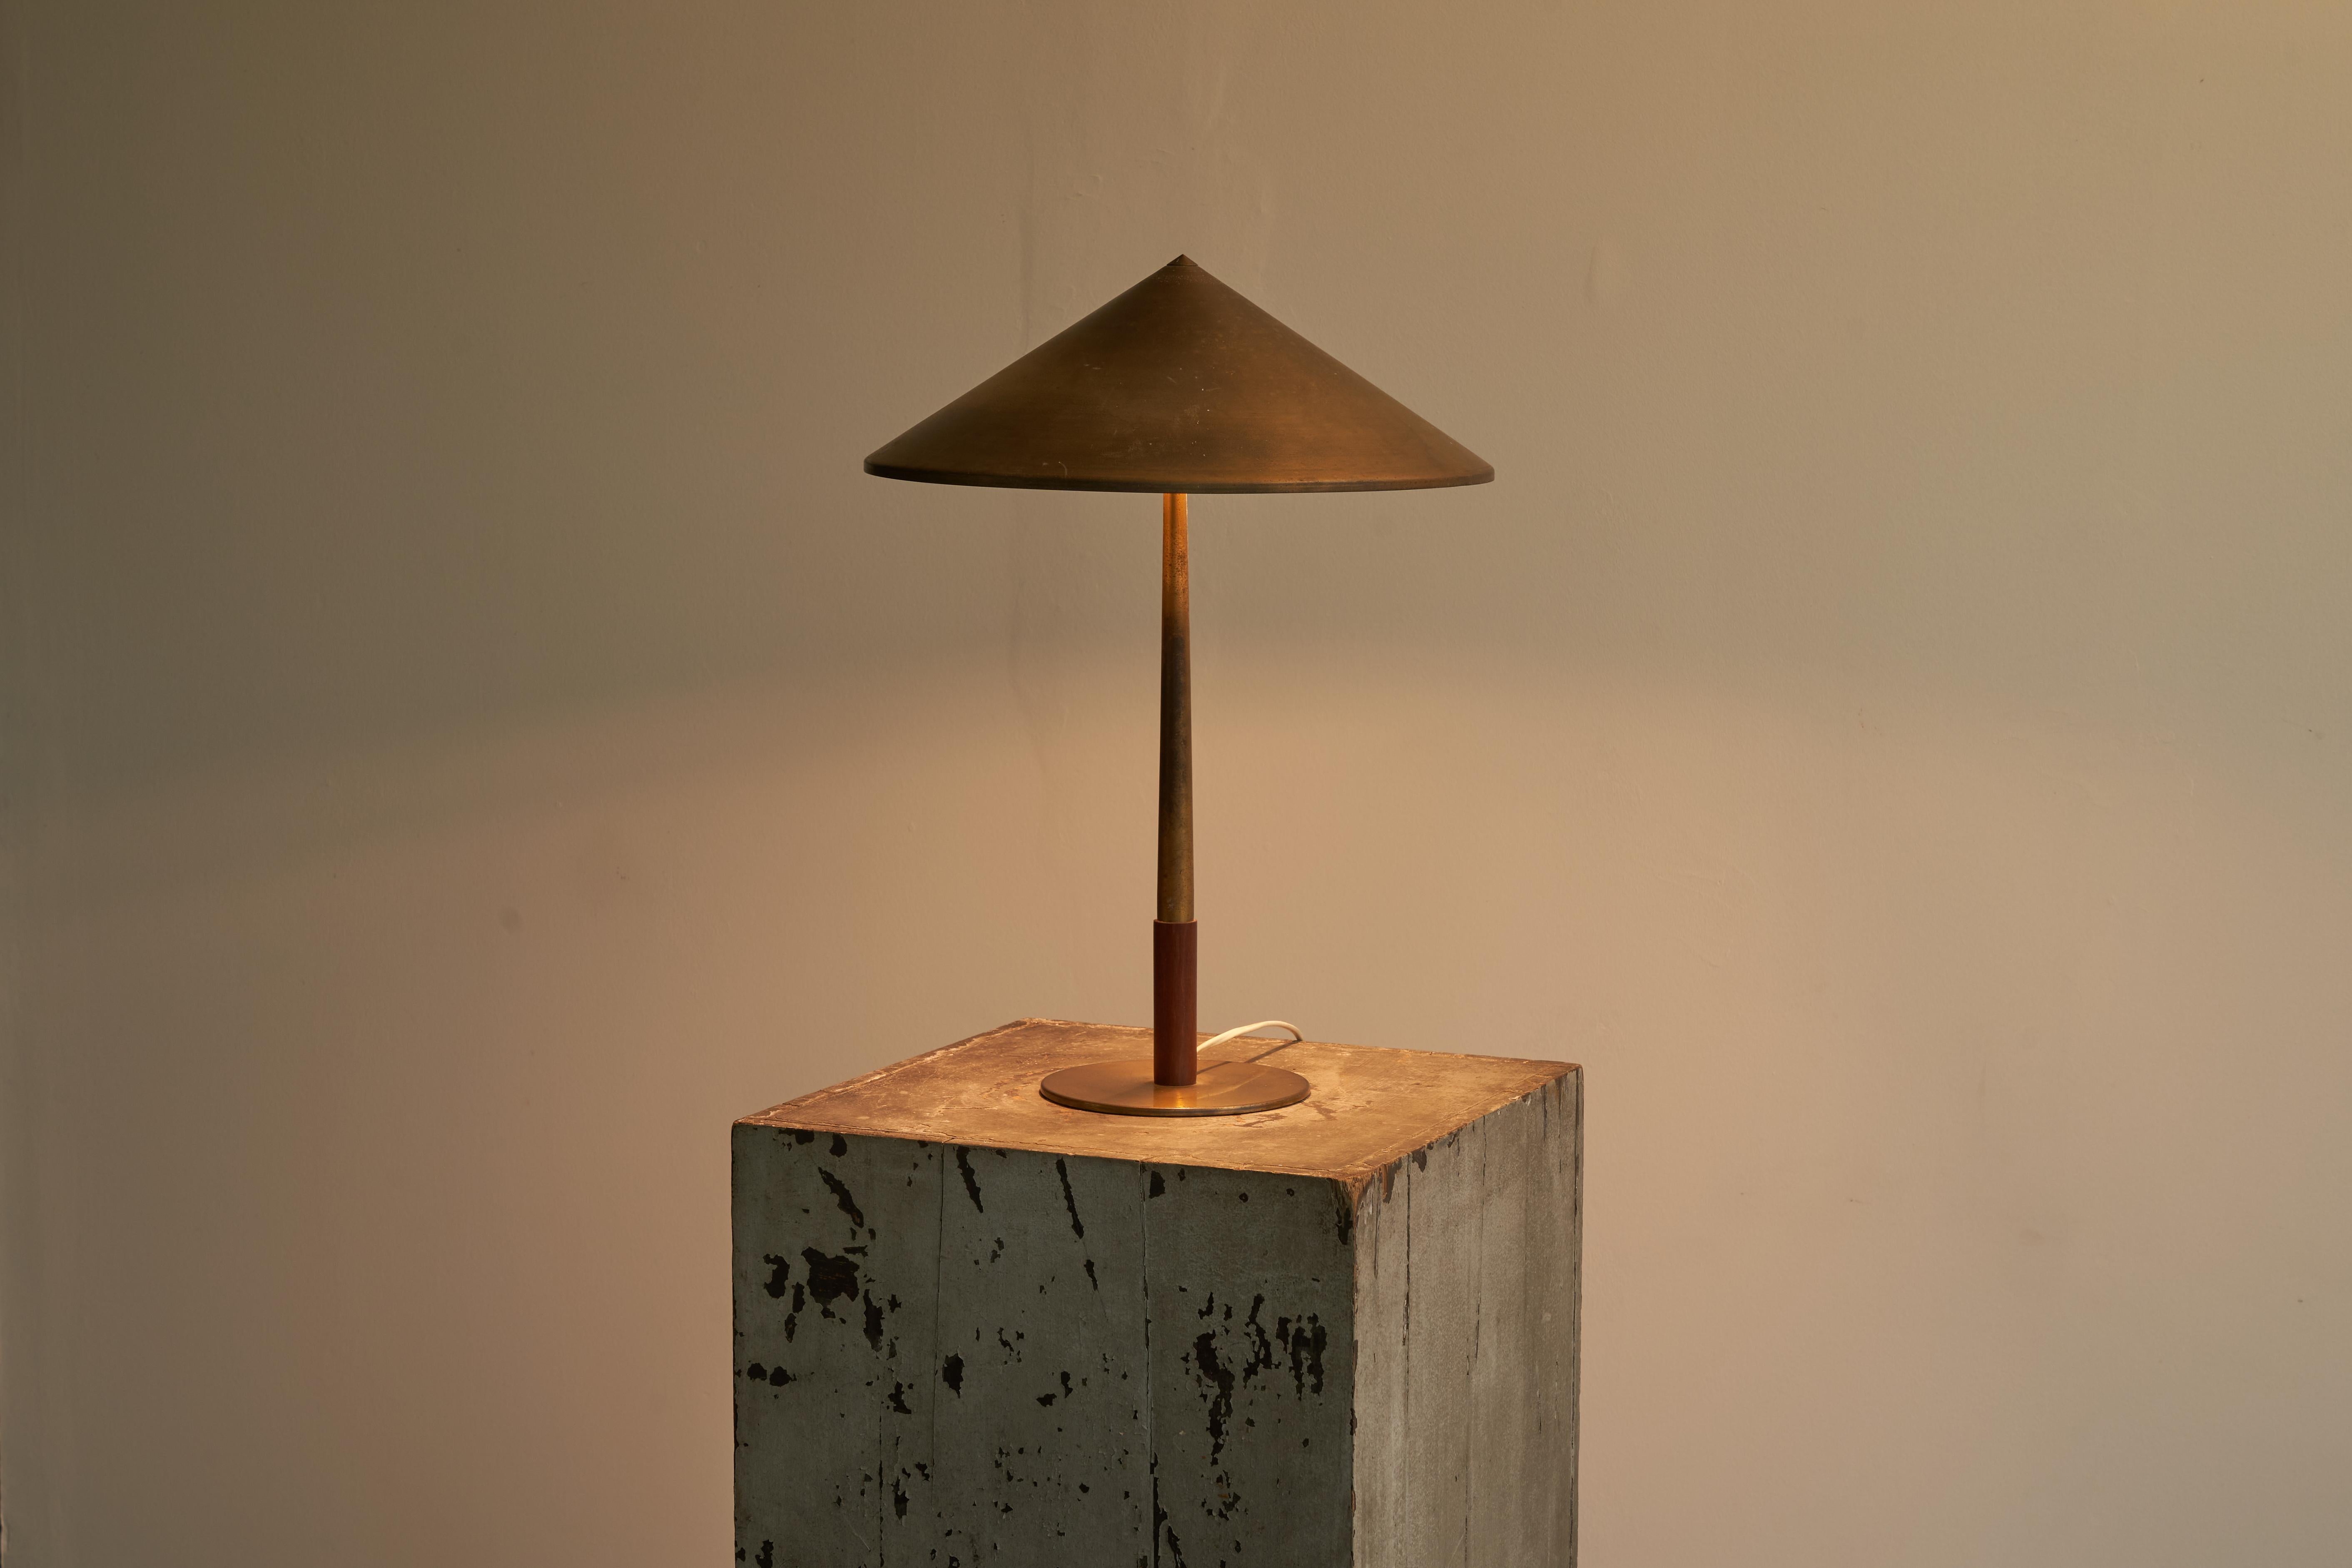 Bent Karlby Table Lamp in Patinated Brass and Teak for Lyfa, Denmark, 1950s.

This elegant table lamp is a rare model by Danish designer Bent Karlby, for Danish brand LYFA. The proportions of this table lamp are very subtle, to be seen in both the